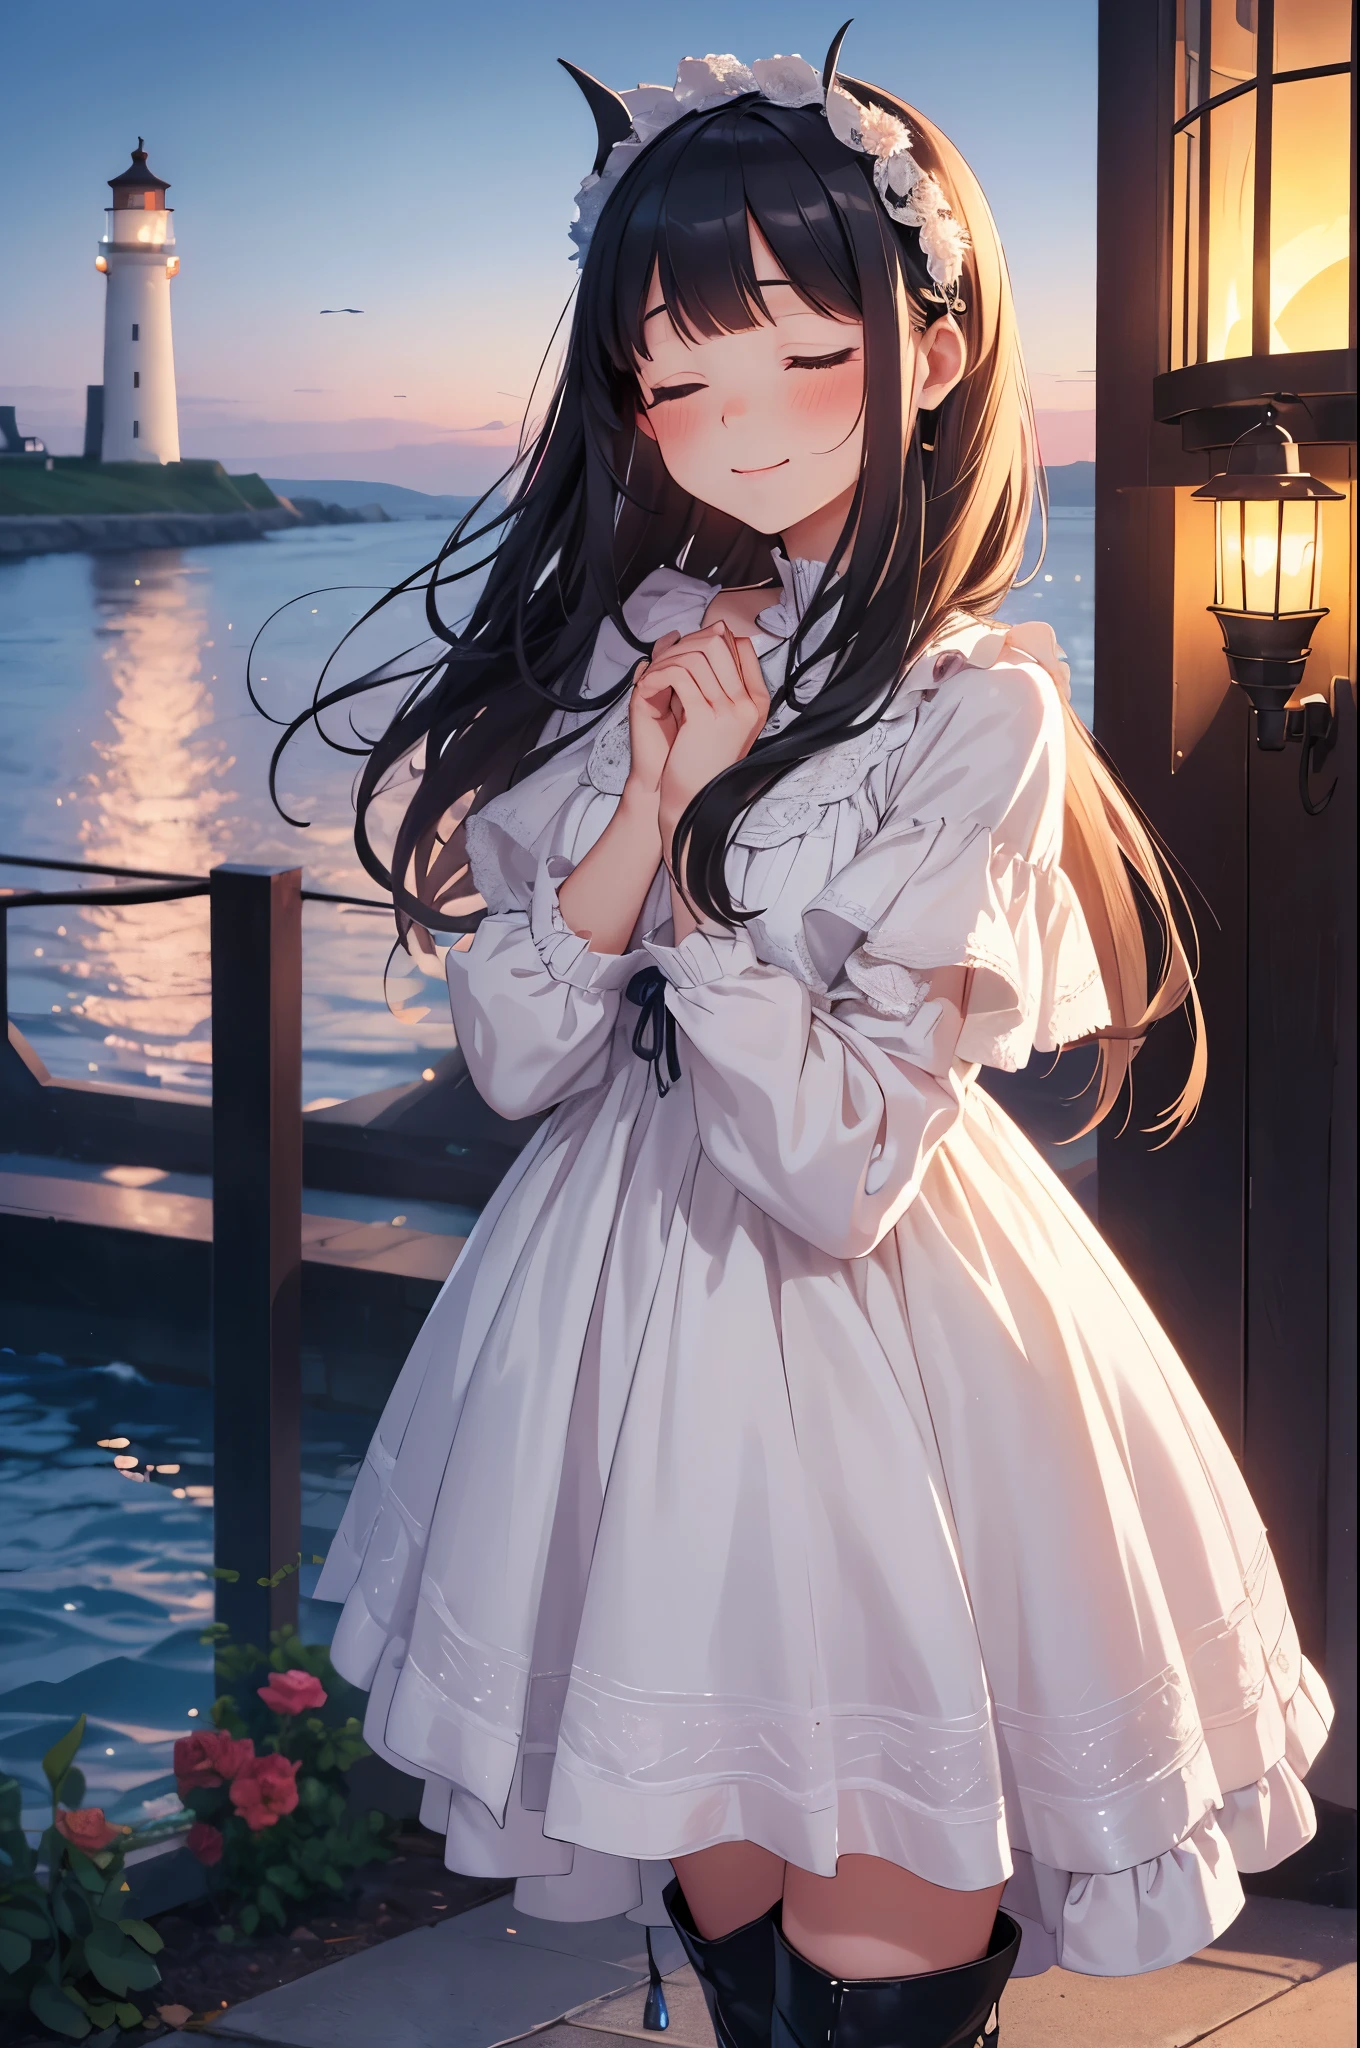 twilight, nightfall, tall lanterns, dusk sea on the background, lighthouse far away, city garden, beautiful, masterpiece, 1-girl, teen aged, long lolita style white dress, happy face, closed eyes, blush on the cheeks, A hand is outstretched towards me, very long fair hair, high black leather boots